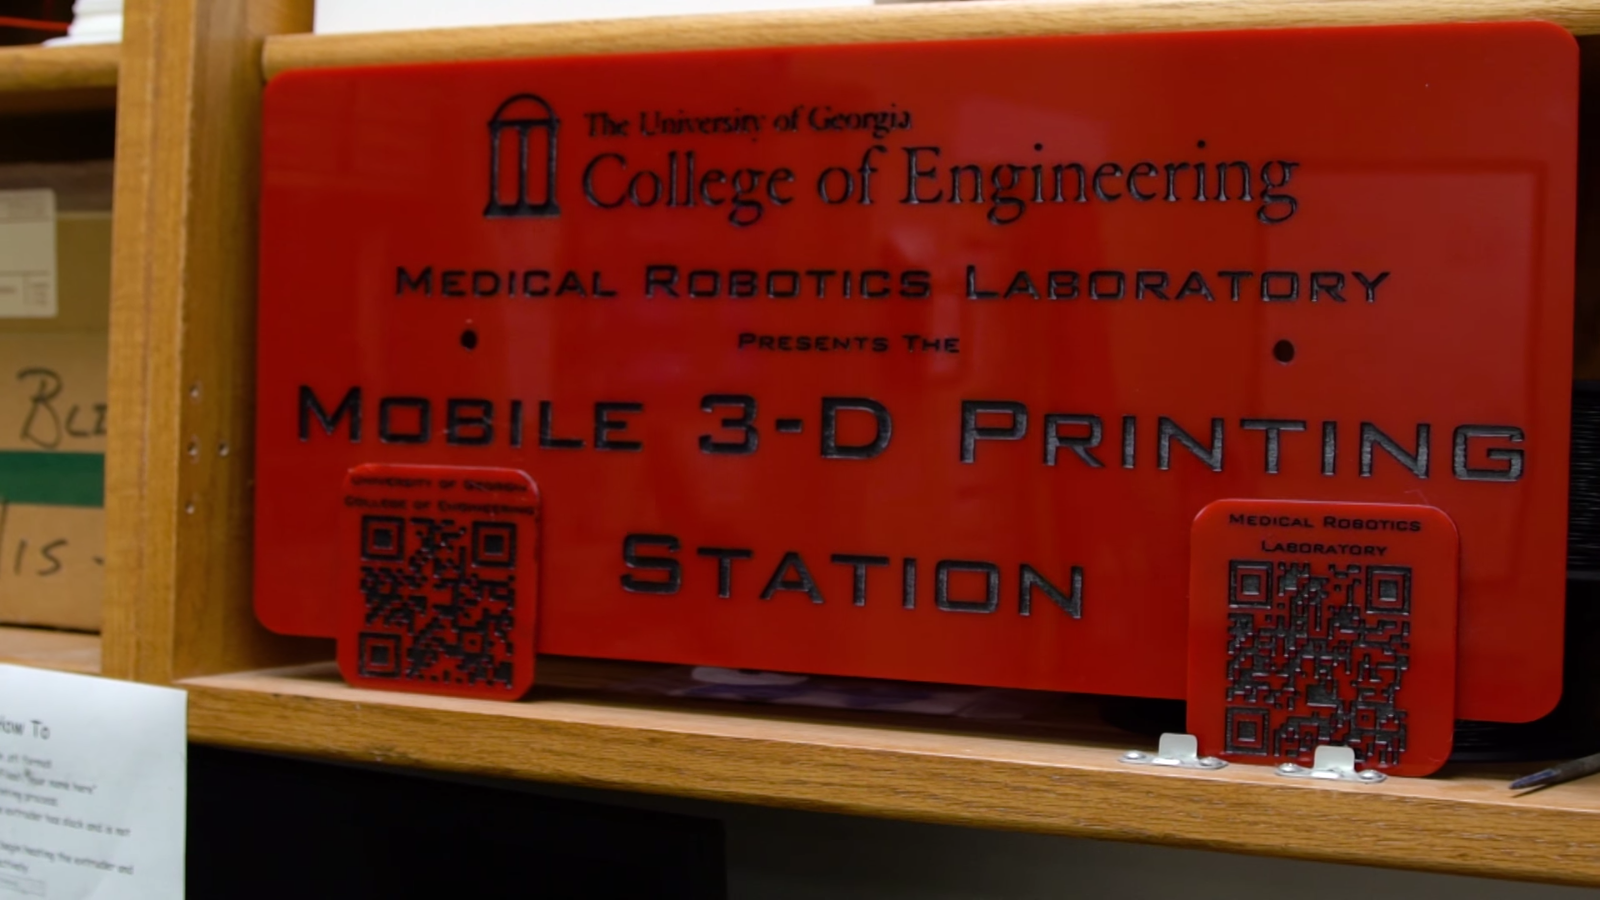 The Mobile 3D Printing Centre at UGA"s College of Engineering. Image via Georgia Bulldogs.